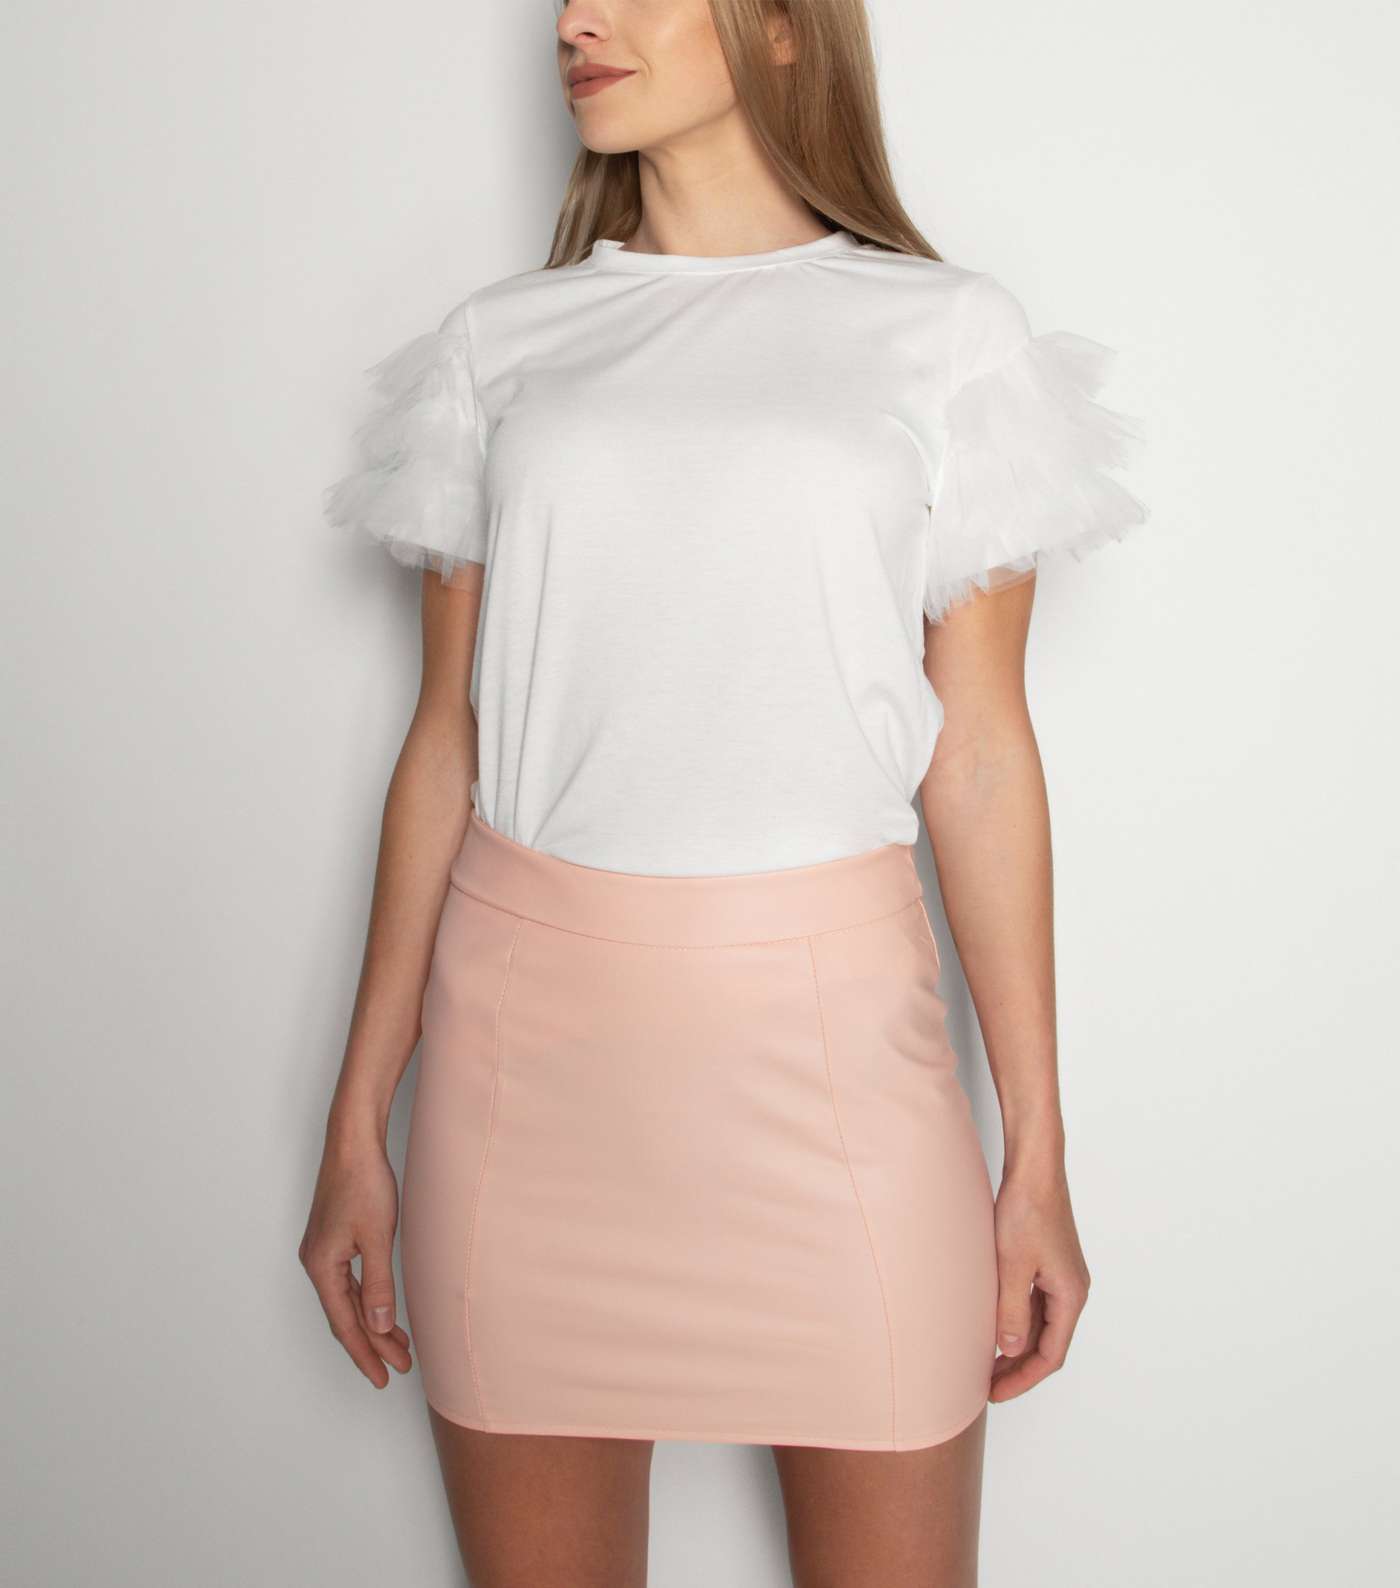 21st Mill Pink Leather-Look Mini Skirt